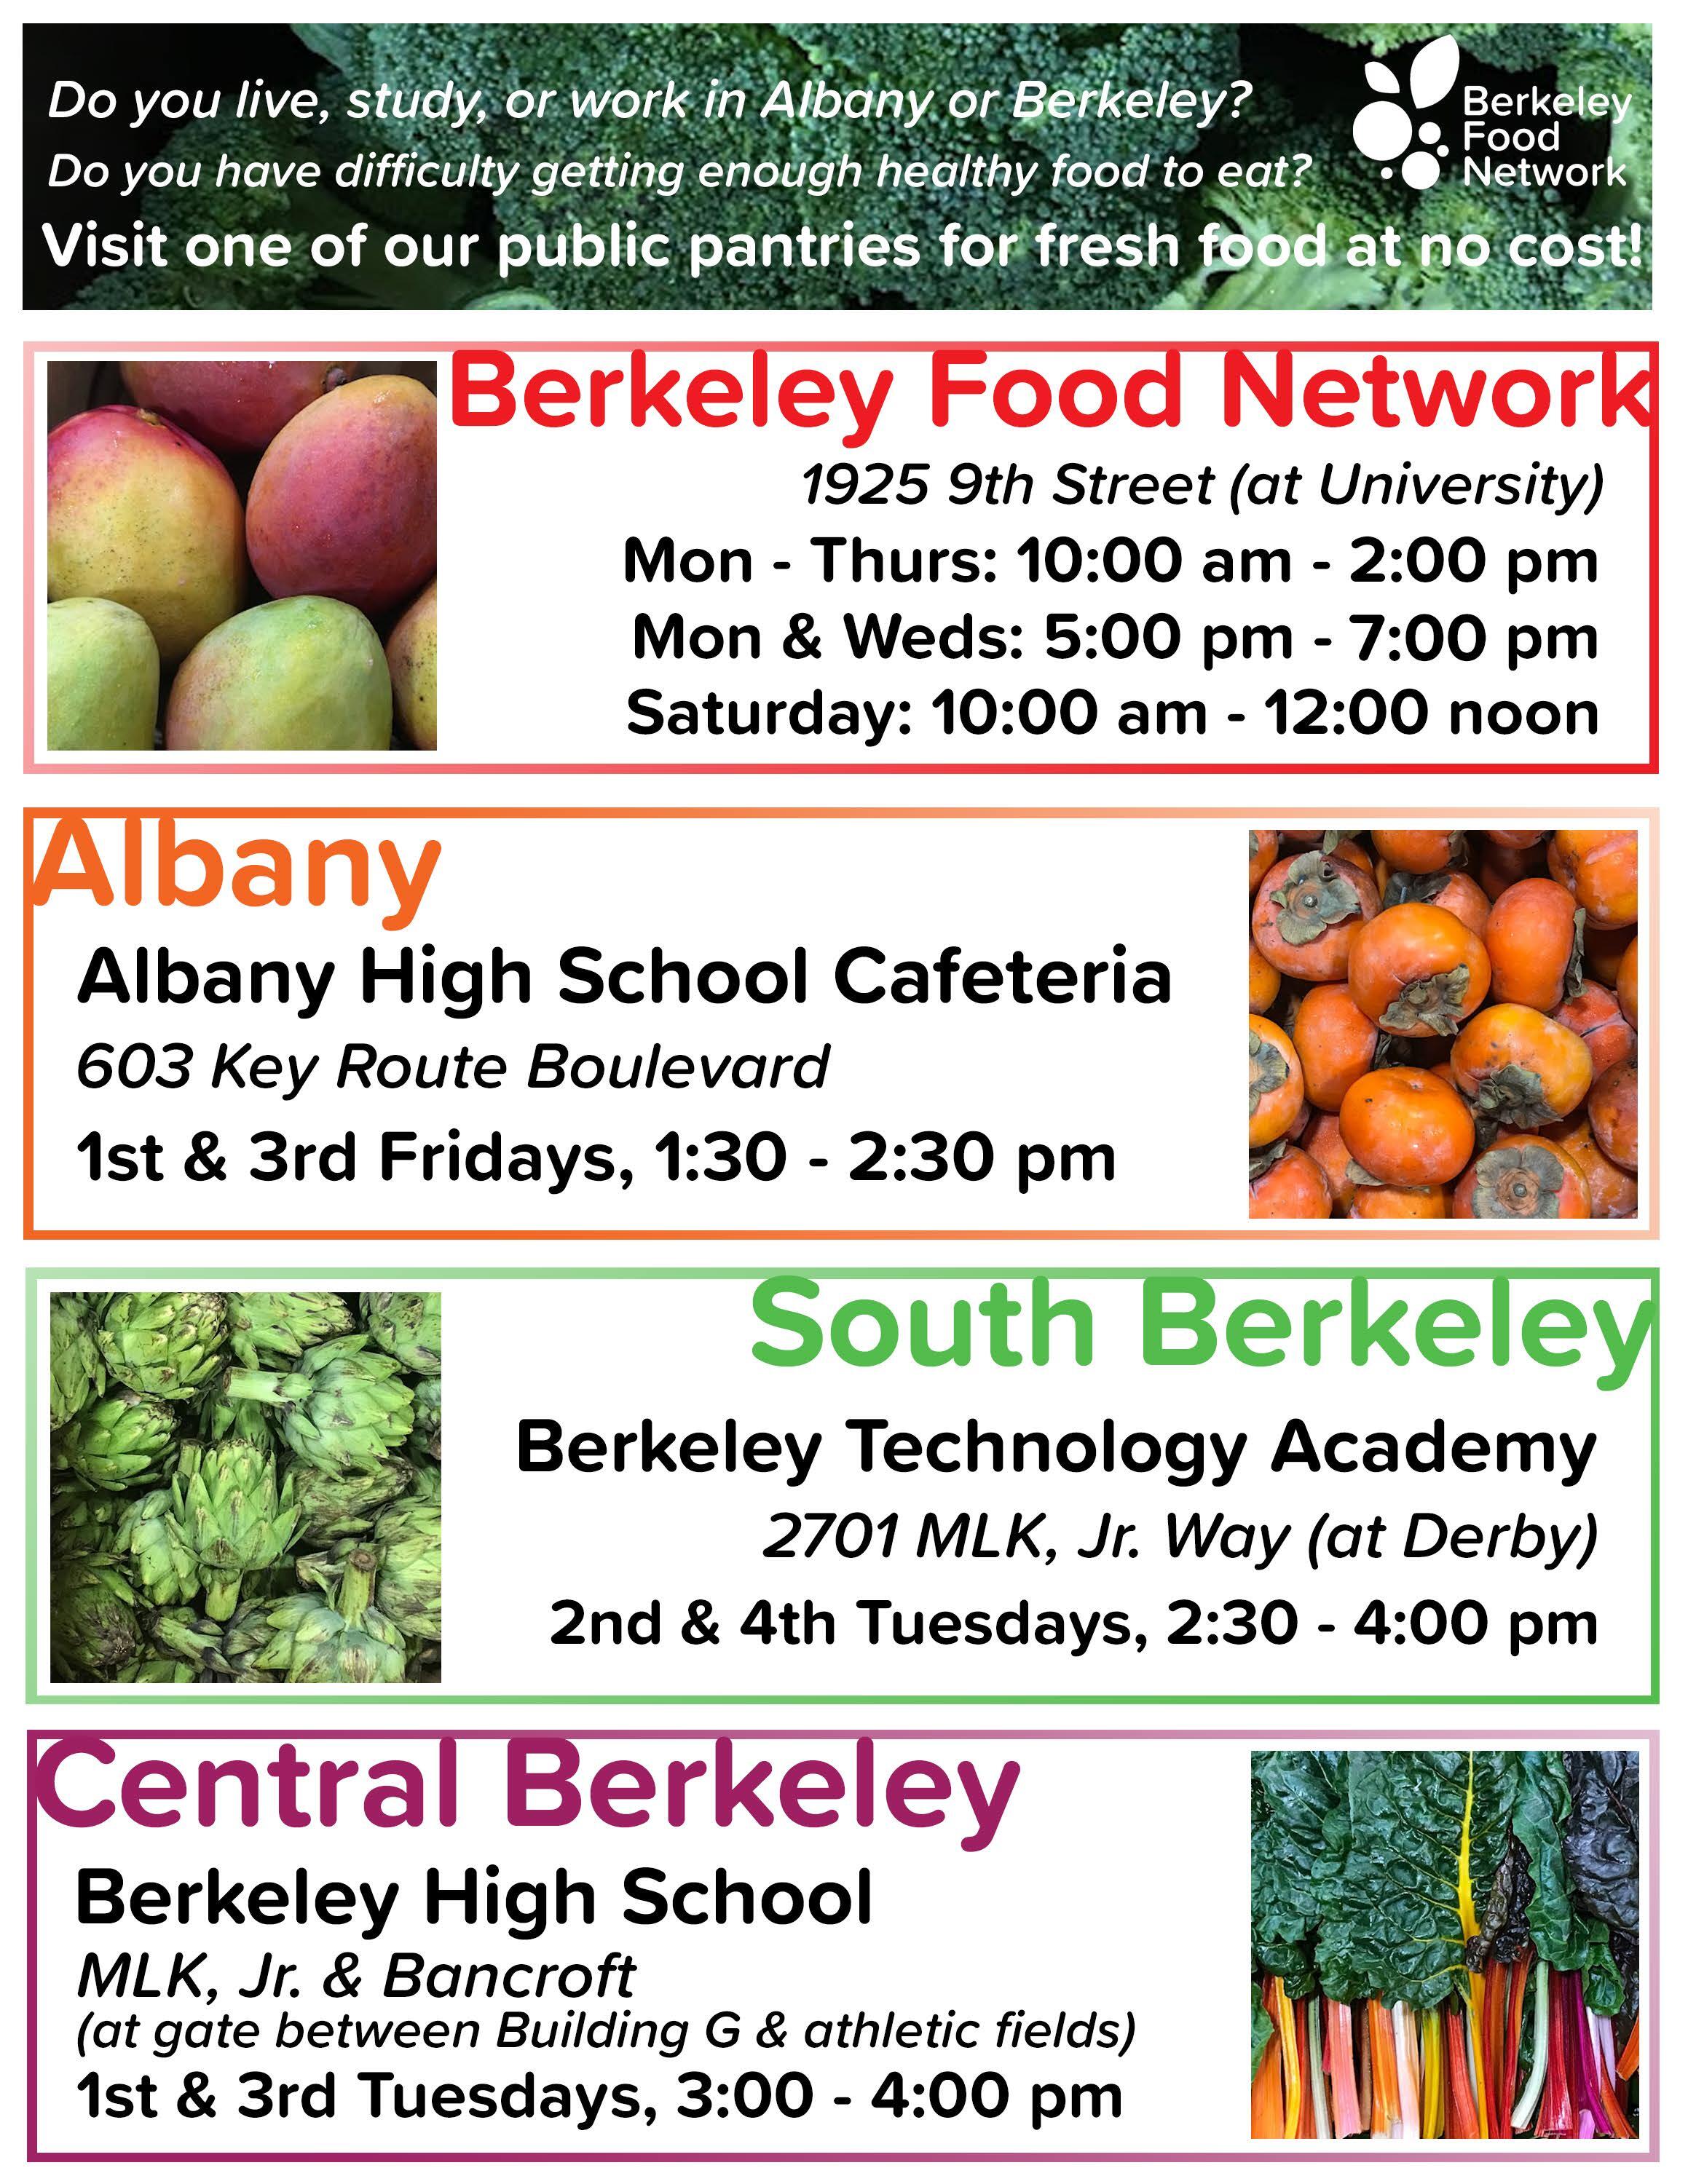 Do you live, study, or work in Albany or Berkeley? Visit one of our public pantries for fresh food at no cost!